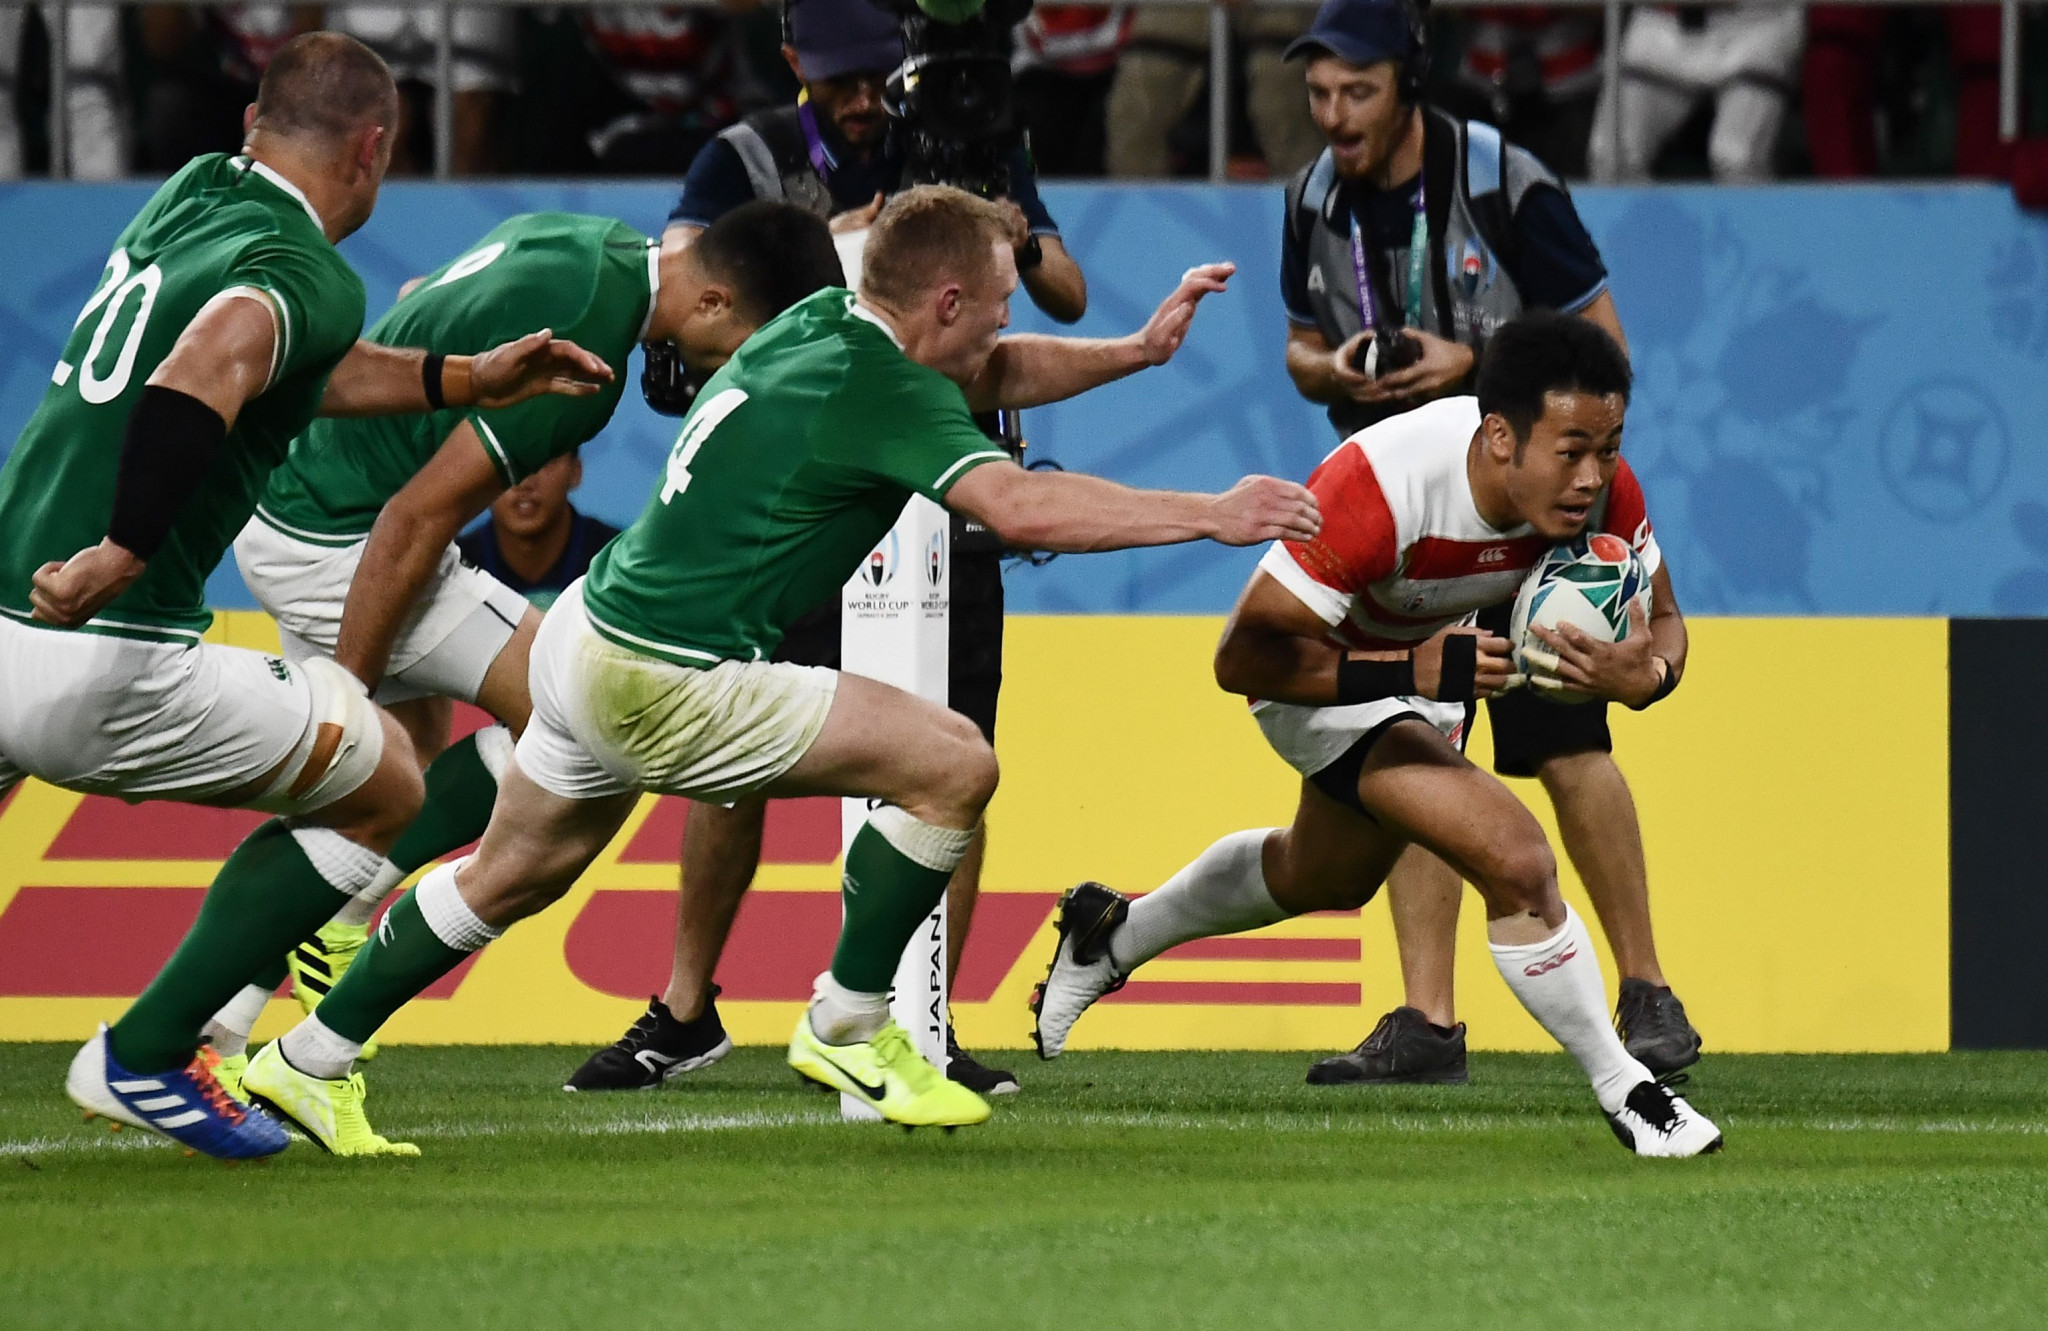 Kenki Fukuoka leaves a trail of Irishmen in his wake, as he scores Japan's crucial try in their shock Rugby World Cup win ©Getty Images